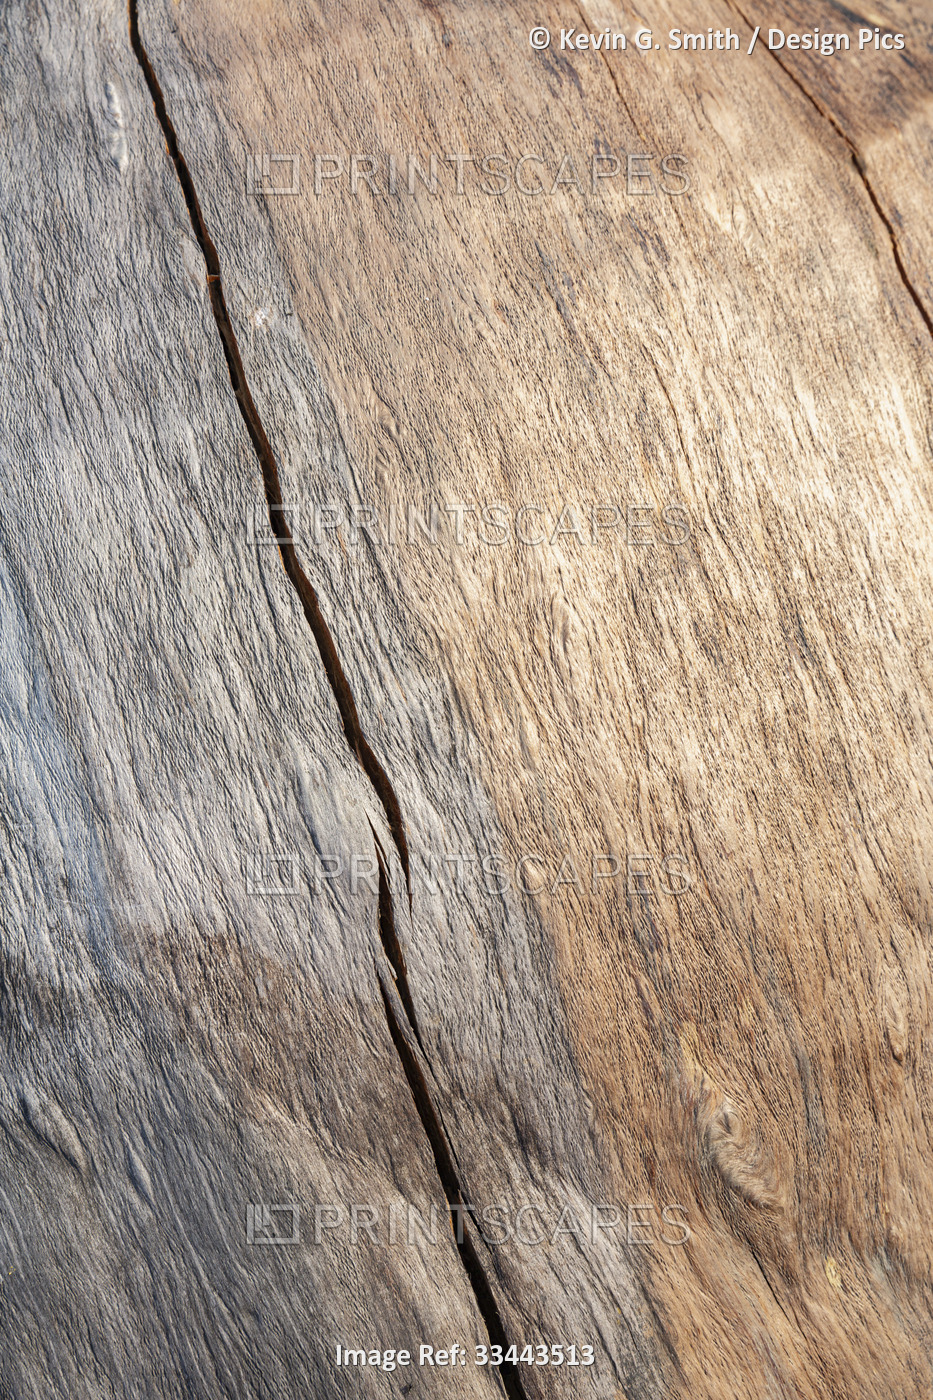 Close-up detail of weathered wood grain pattern in a spruce burl in Summer, ...